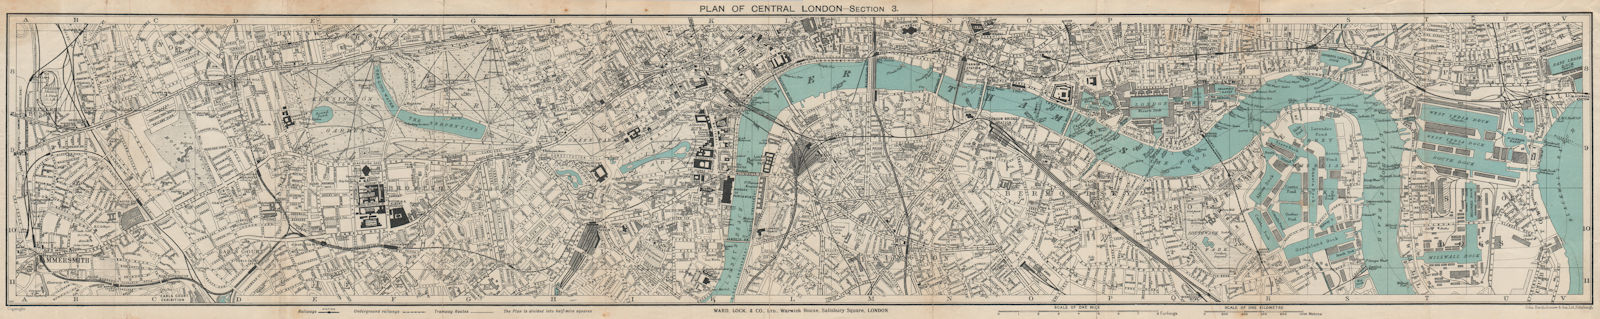 Associate Product CENTRAL LONDON-SECTION 3 vintage town/city plan. London. WARD LOCK 1932 map